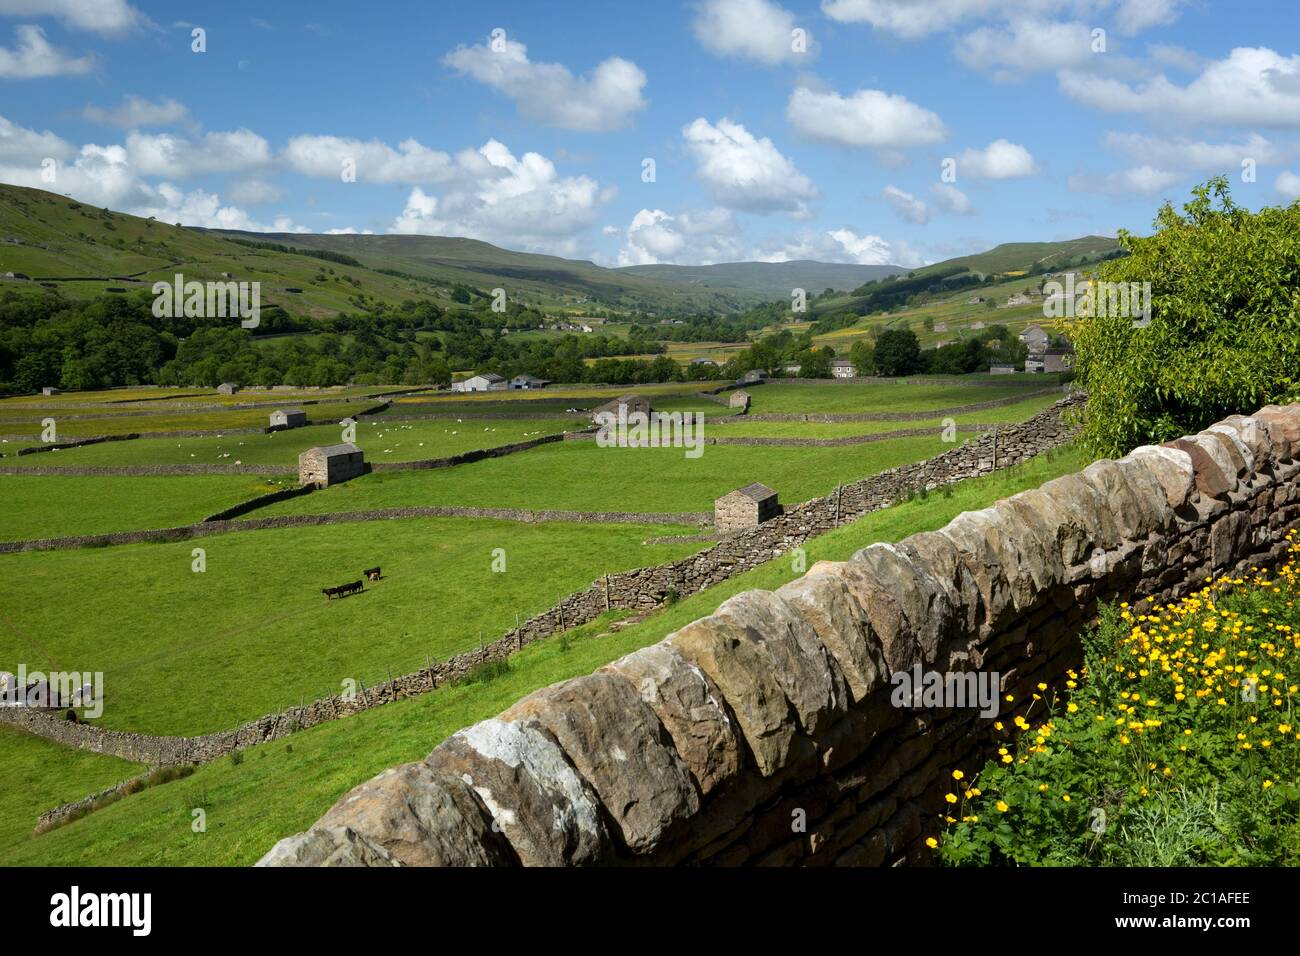 View over the valley of Swaledale, Gunnerside, Yorkshire Dales National Park, North Yorkshire, England, United Kingdom, Europe Stock Photo